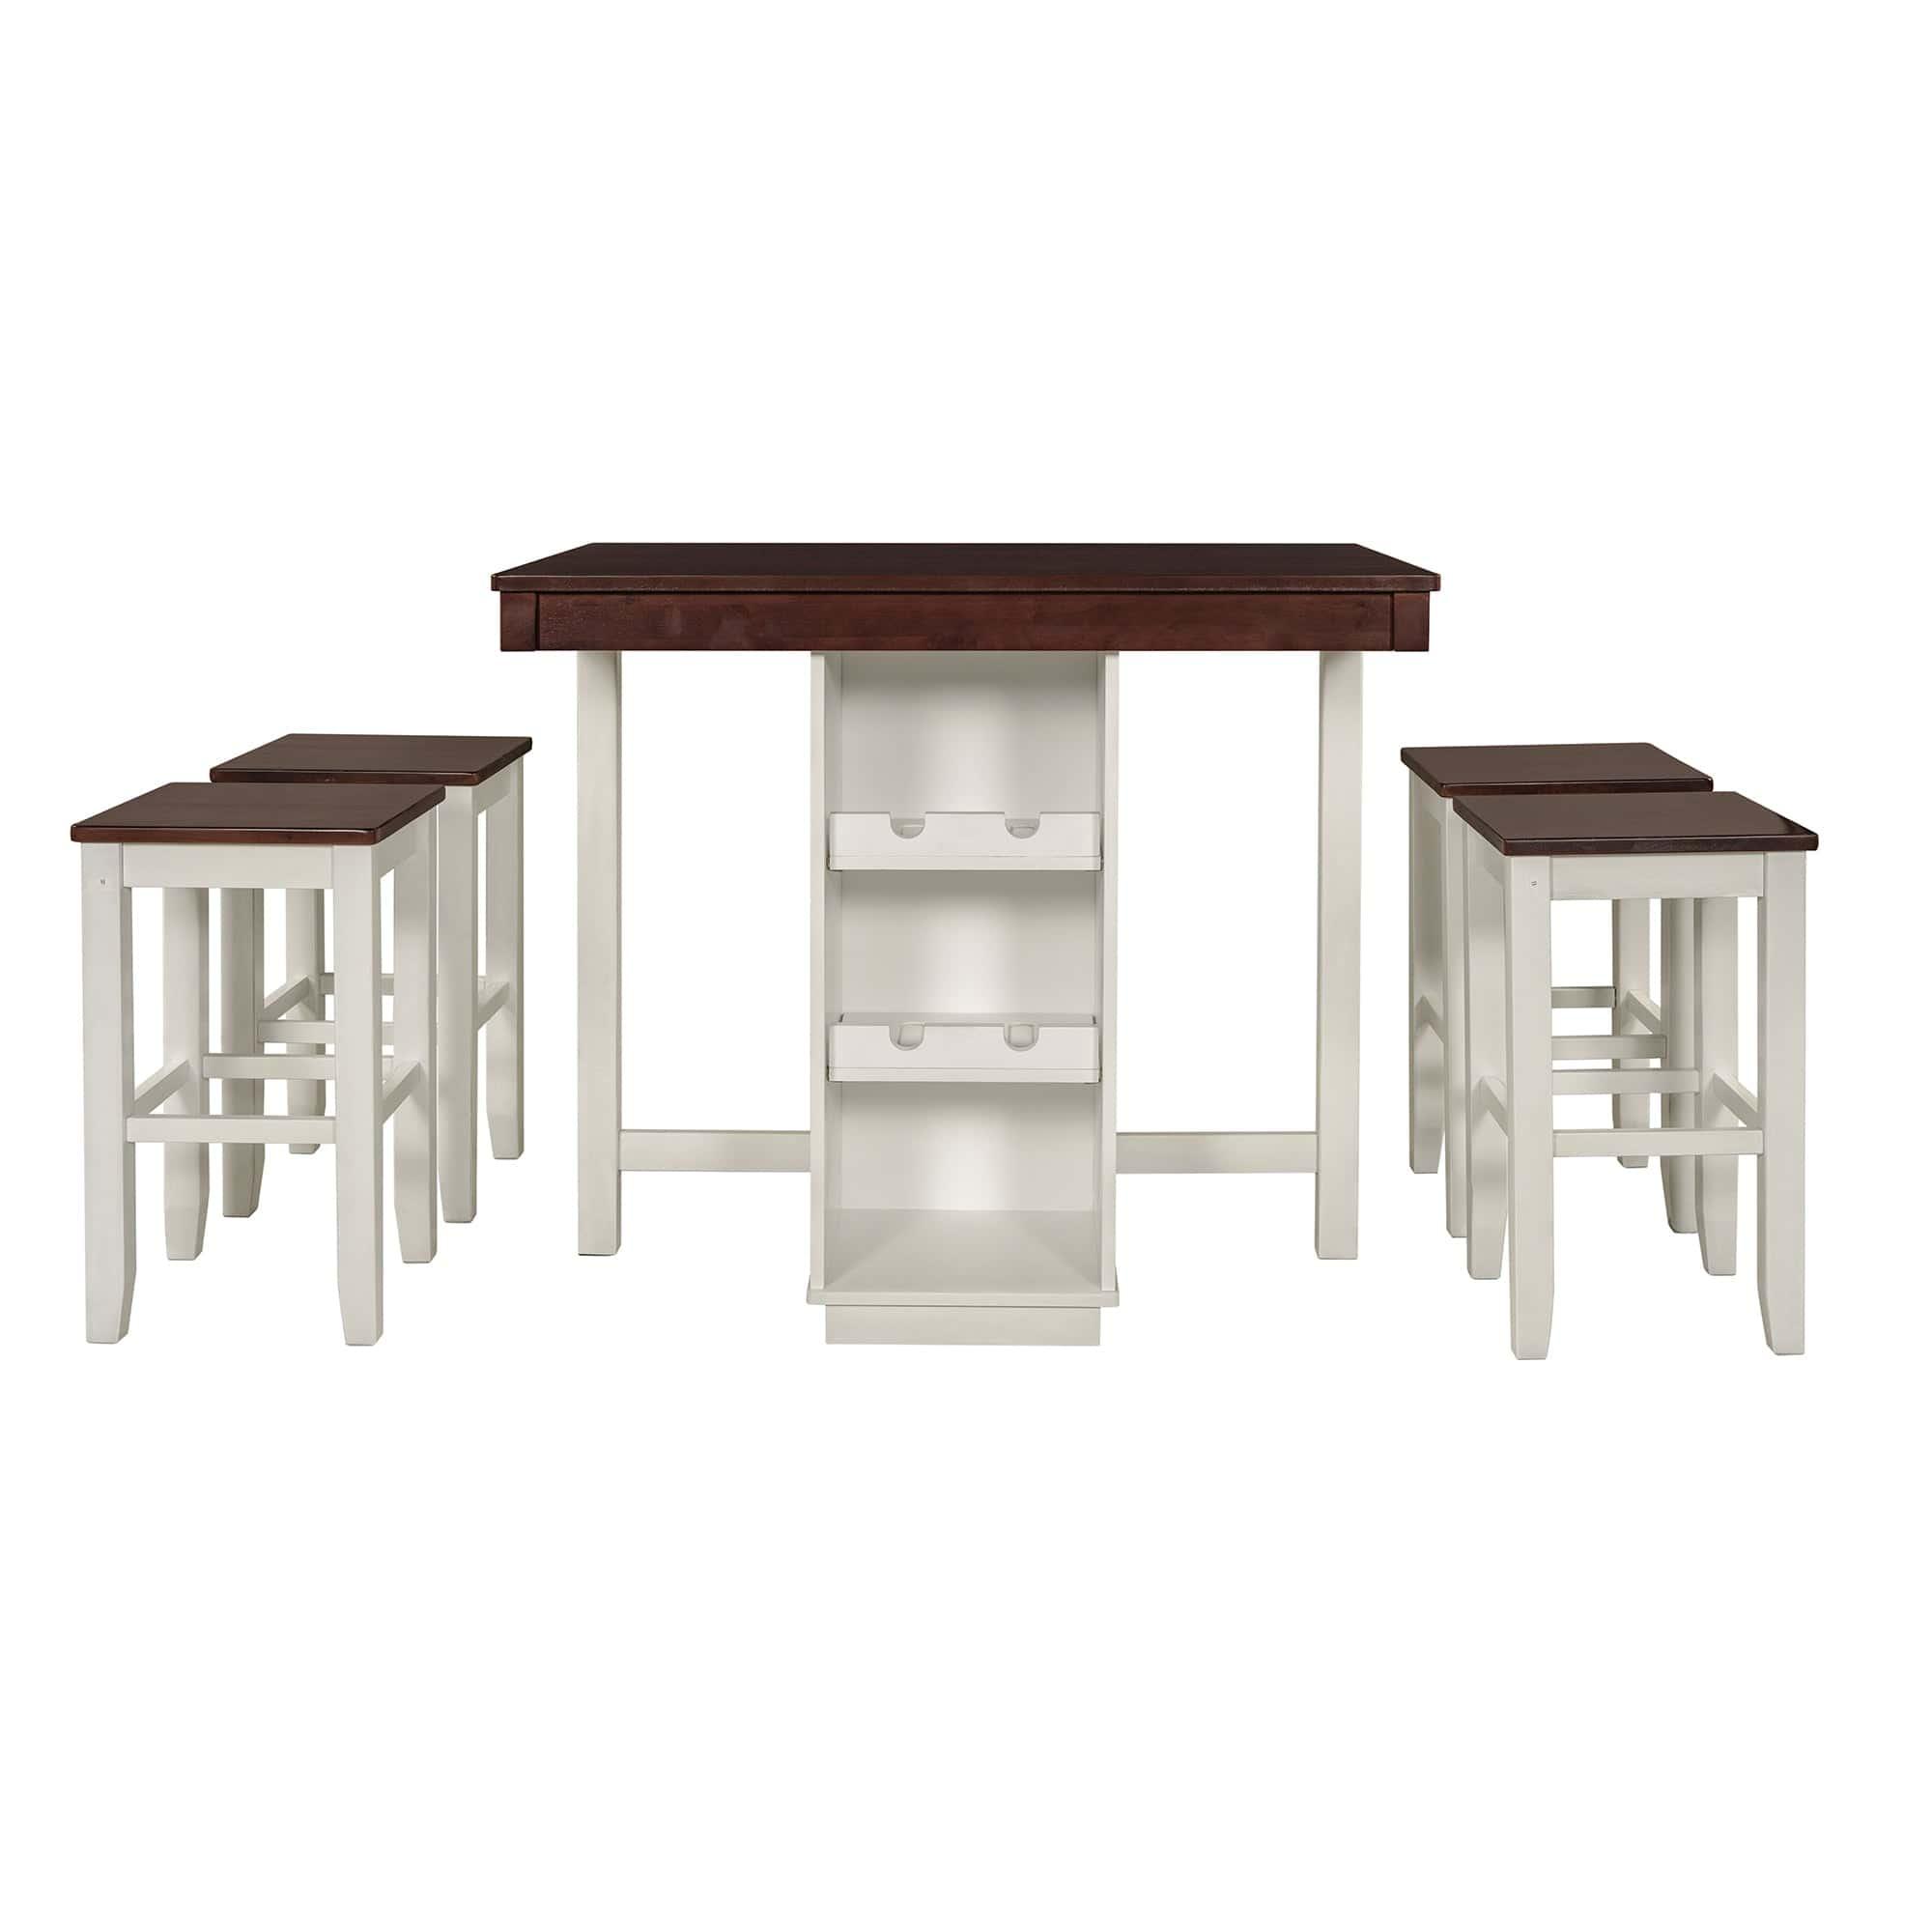 Shop TOPMAX Farmhouse 5-pieces Counter Height Dining Sets, Square Wood Table with 3-Tier Adjustable Storage Shelves and Wine Racks for Small Spaces, Set of 4 Stools, White Mademoiselle Home Decor